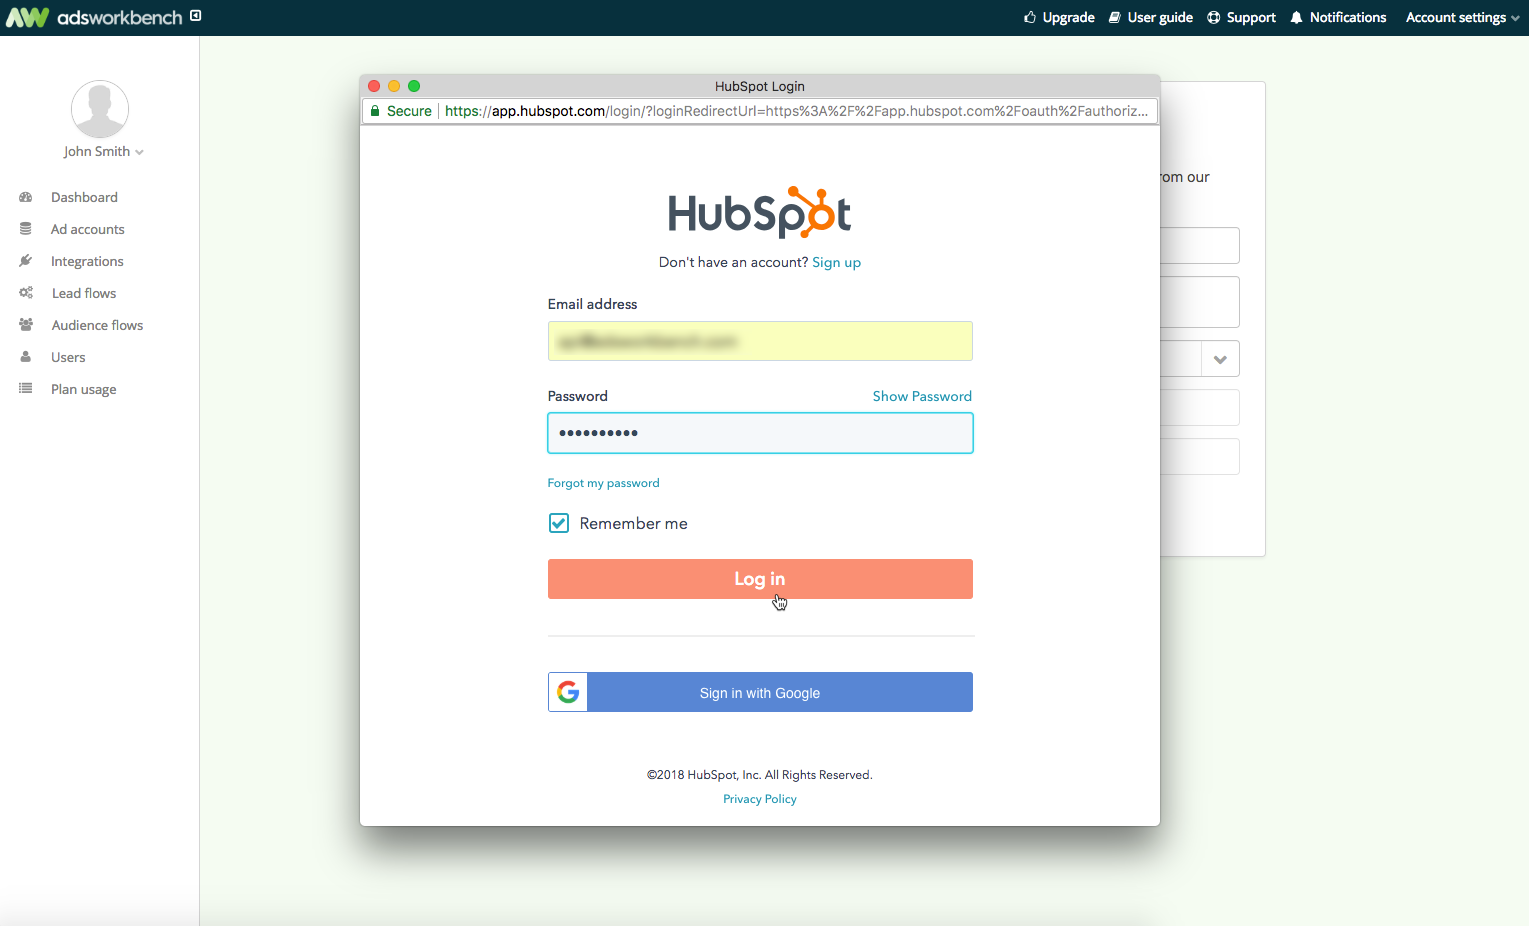 Facebook Lead ads integration with HubSpot